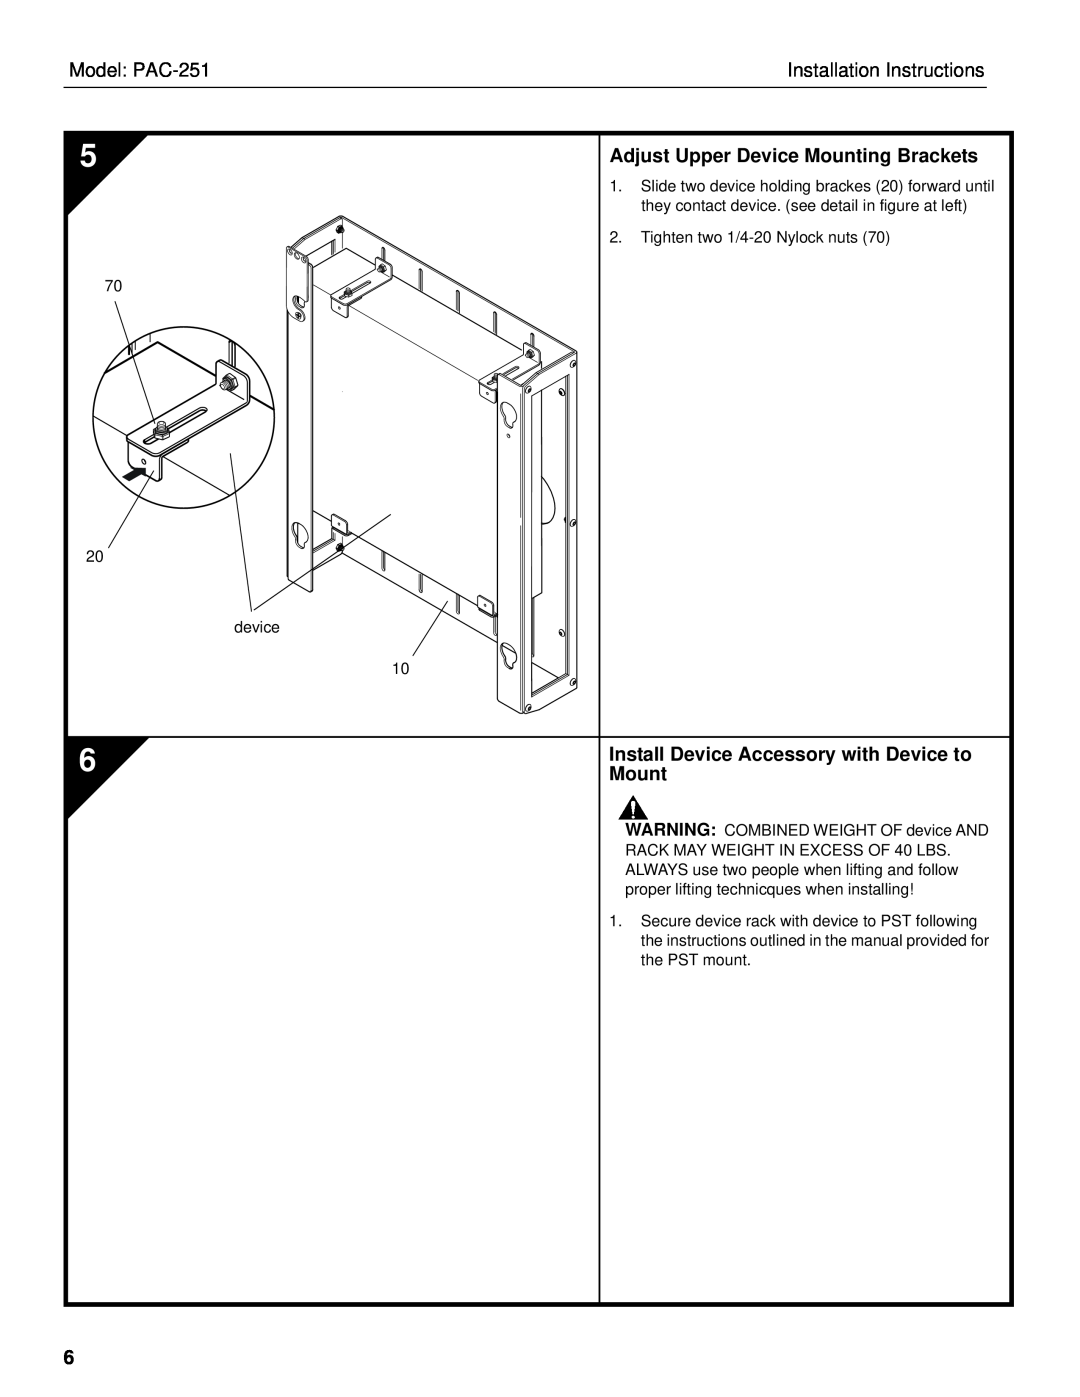 Chief Manufacturing Adjust Upper Device Mounting Brackets, Install Device Accessory with Device to, Model PAC-251 